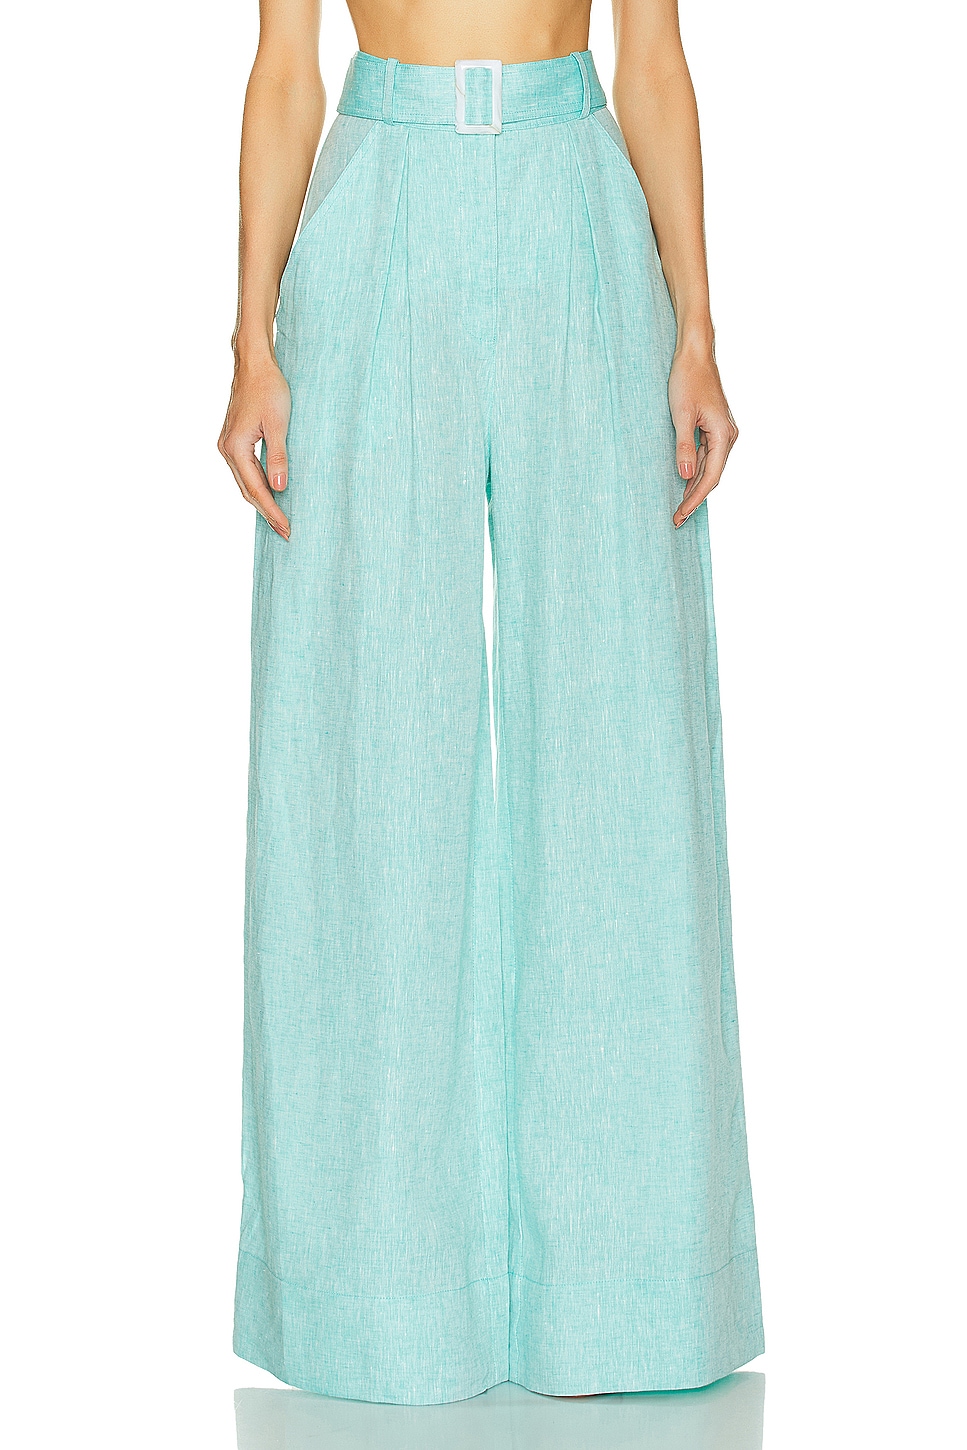 Wide Leg Pleated Pant in Teal